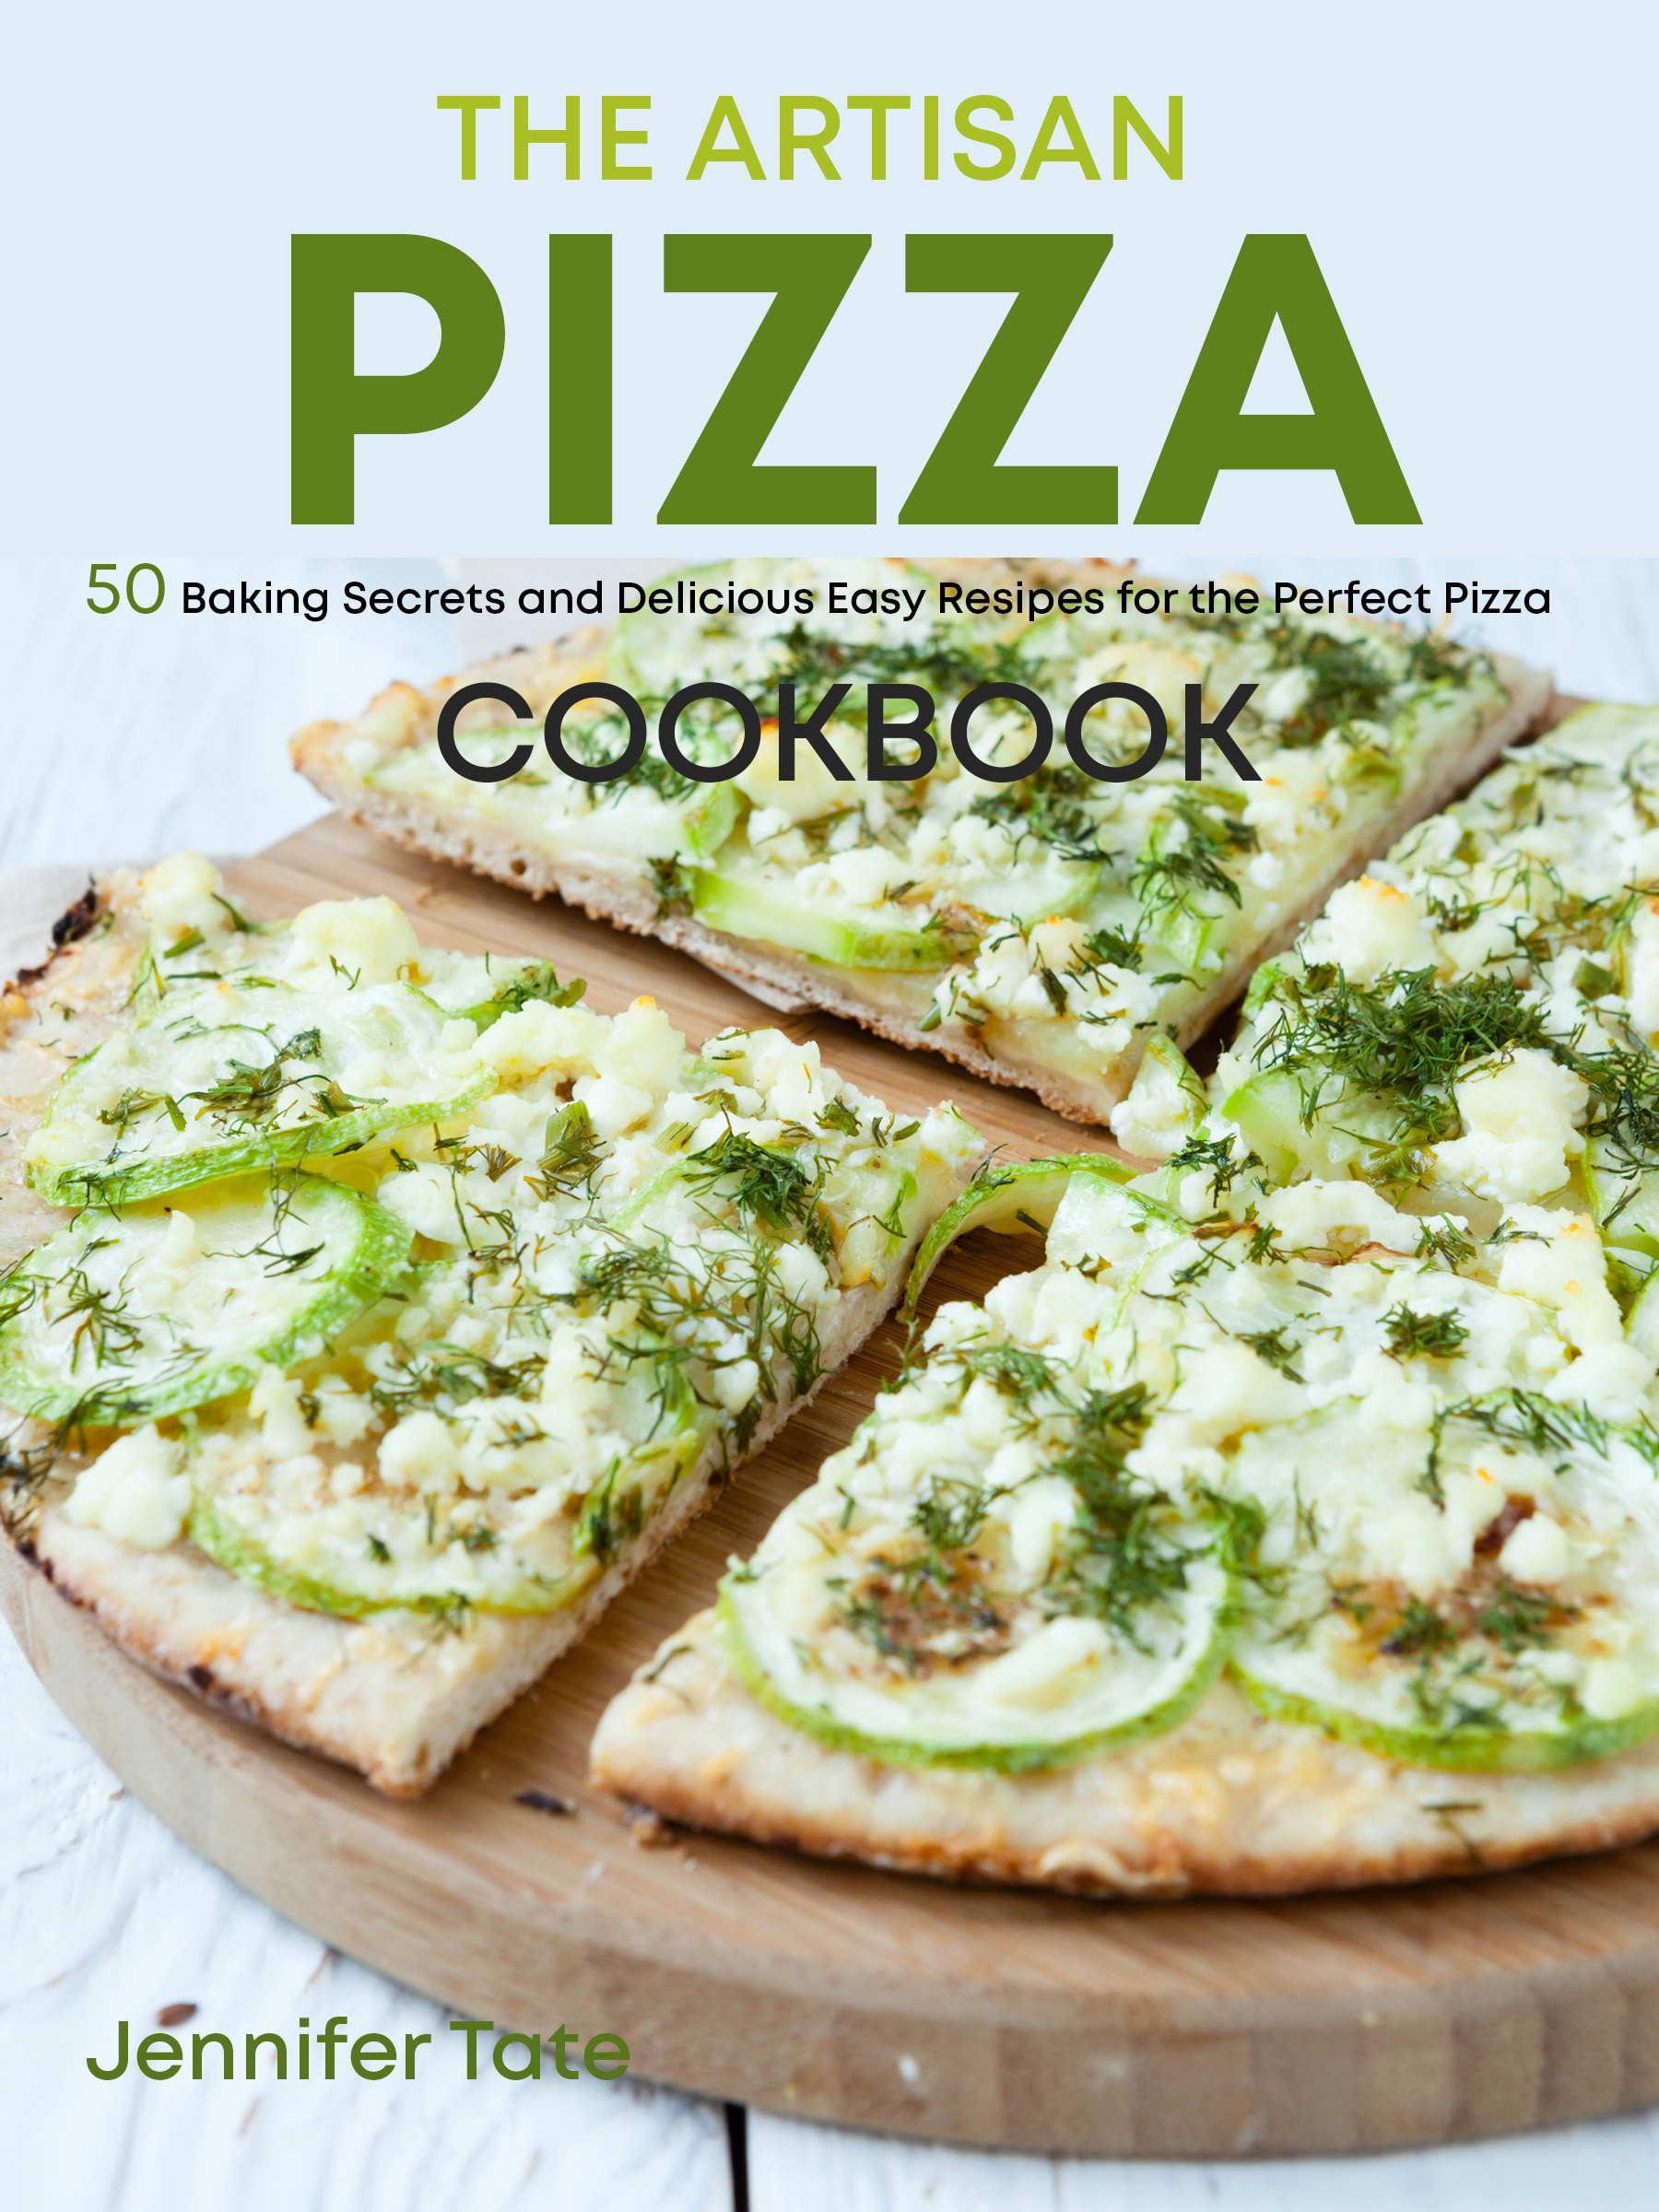 FREE: Artisan Pizza Cookbook: Baking Secrets and Delicious Easy Recipes for the Perfect Pizza by Jennifer Tate